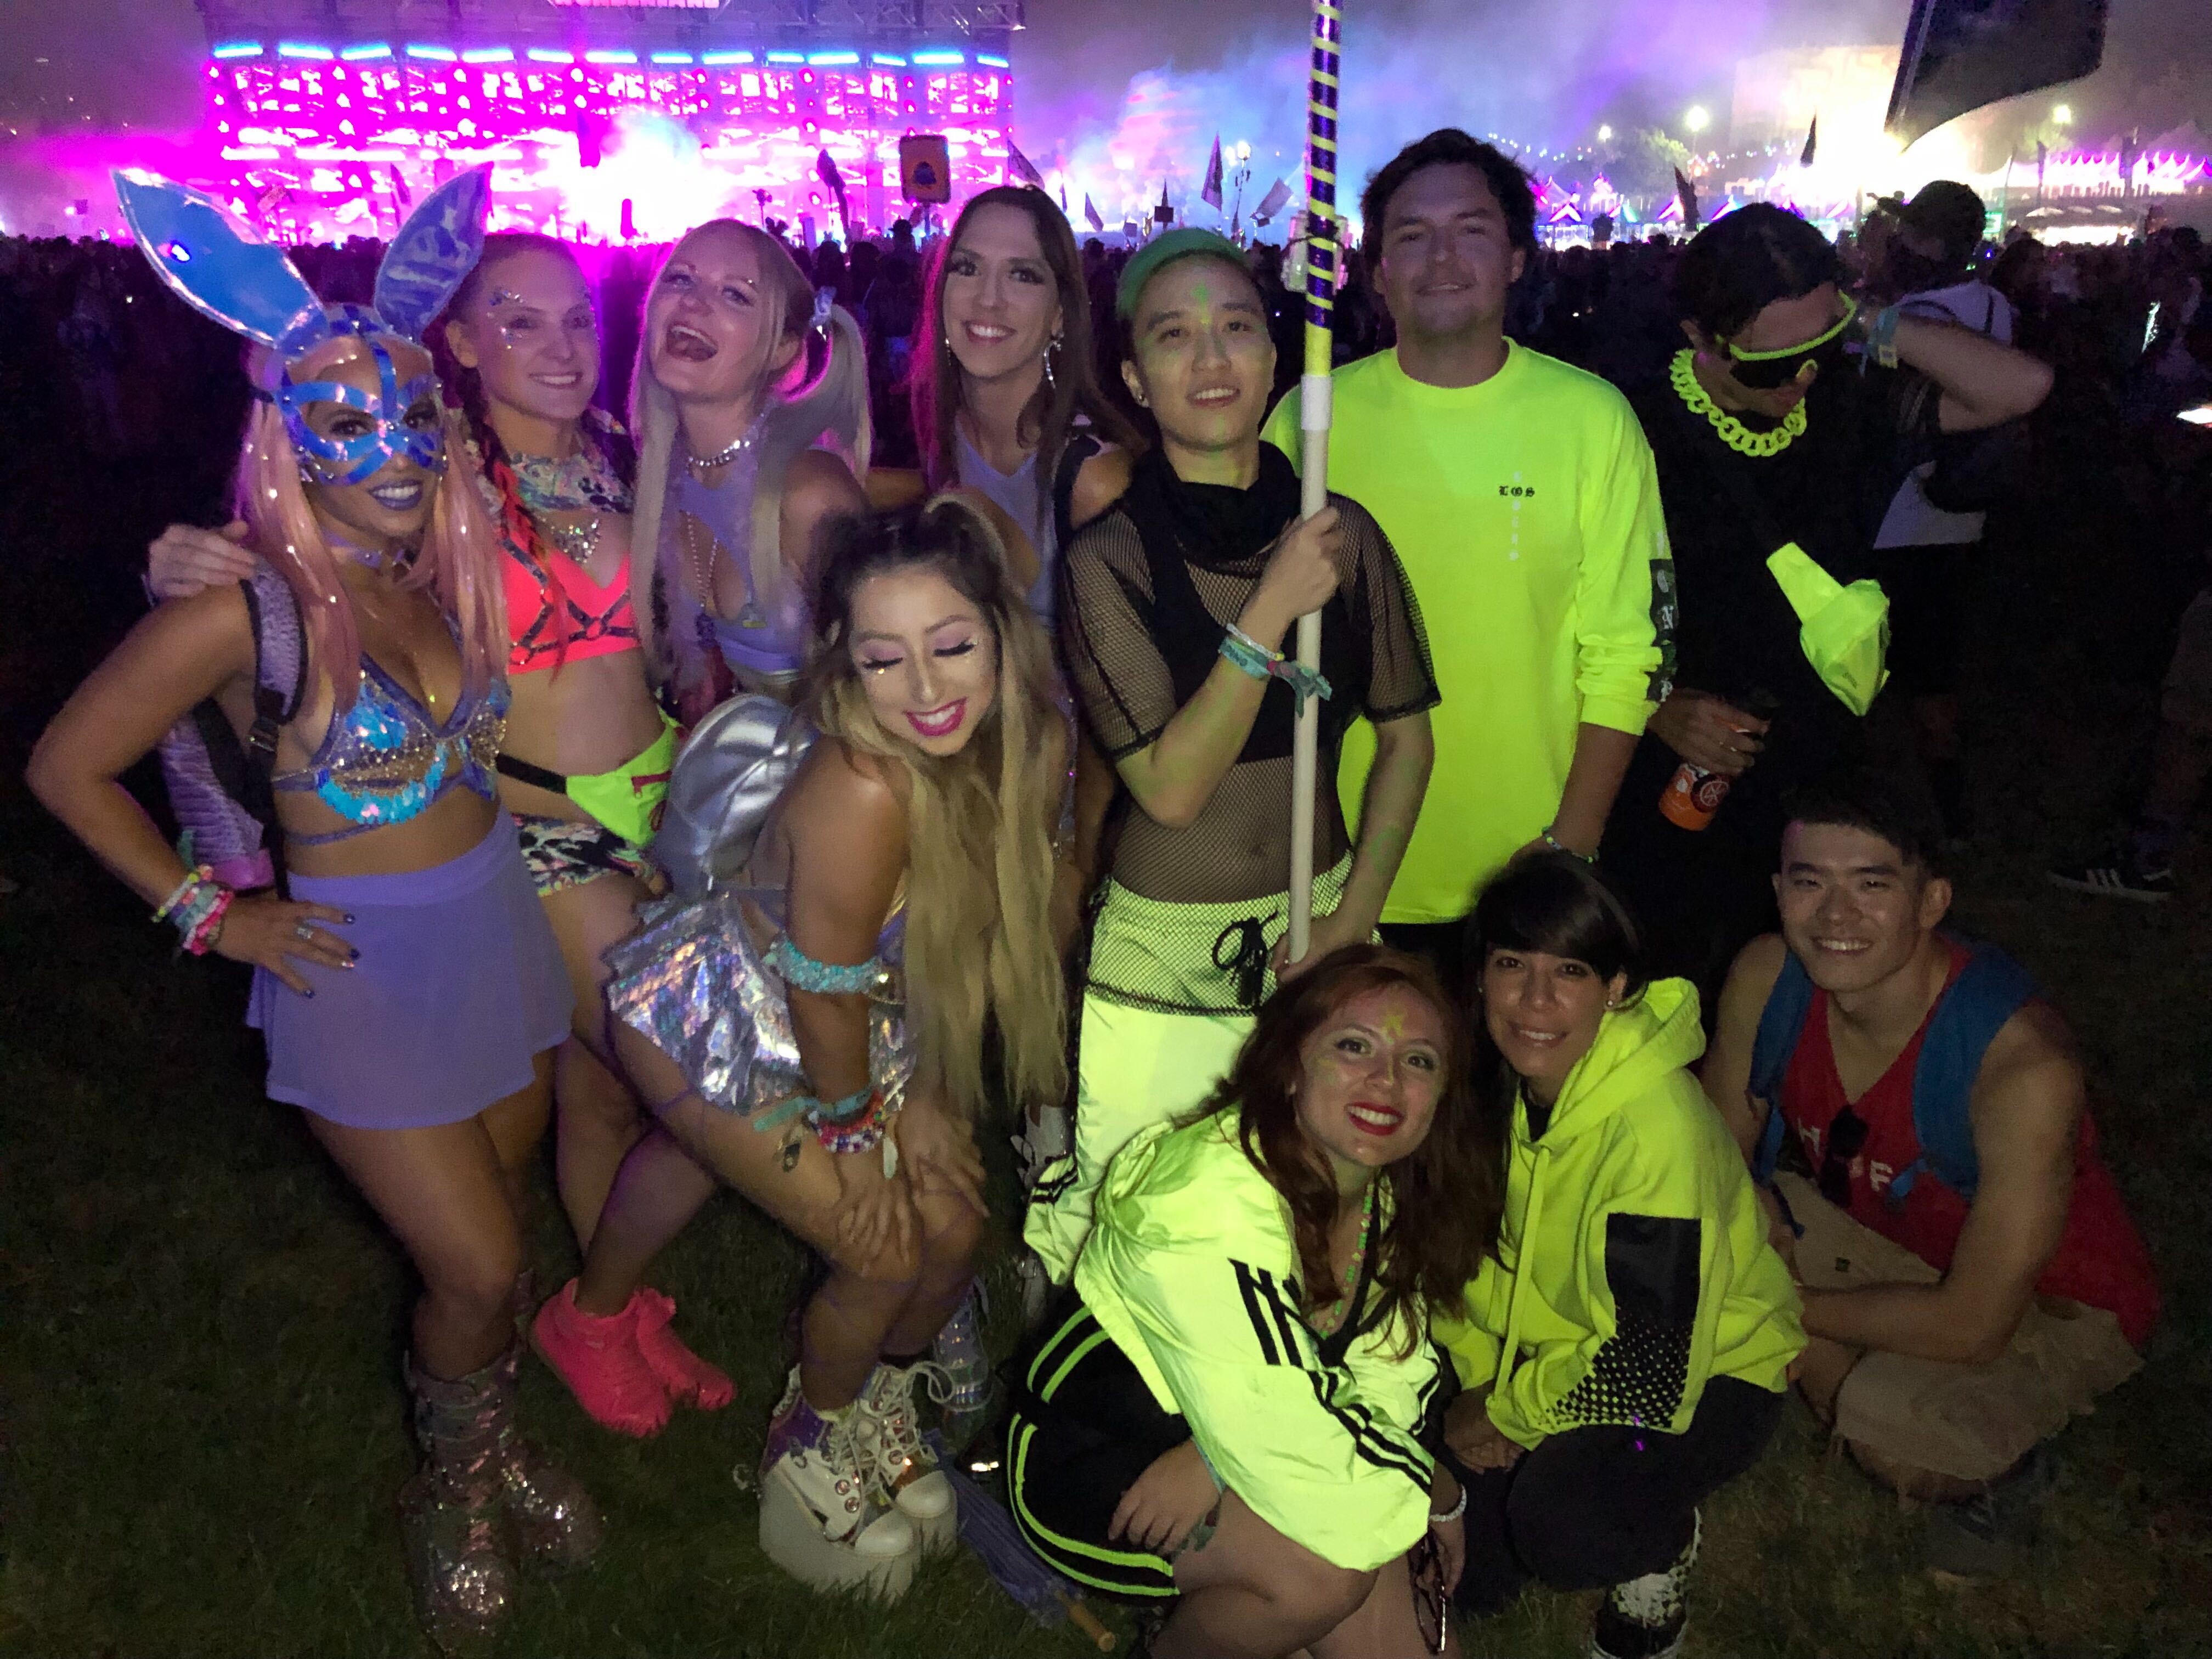 What Kind of People Go to Raves? Here is Each Type, Classified